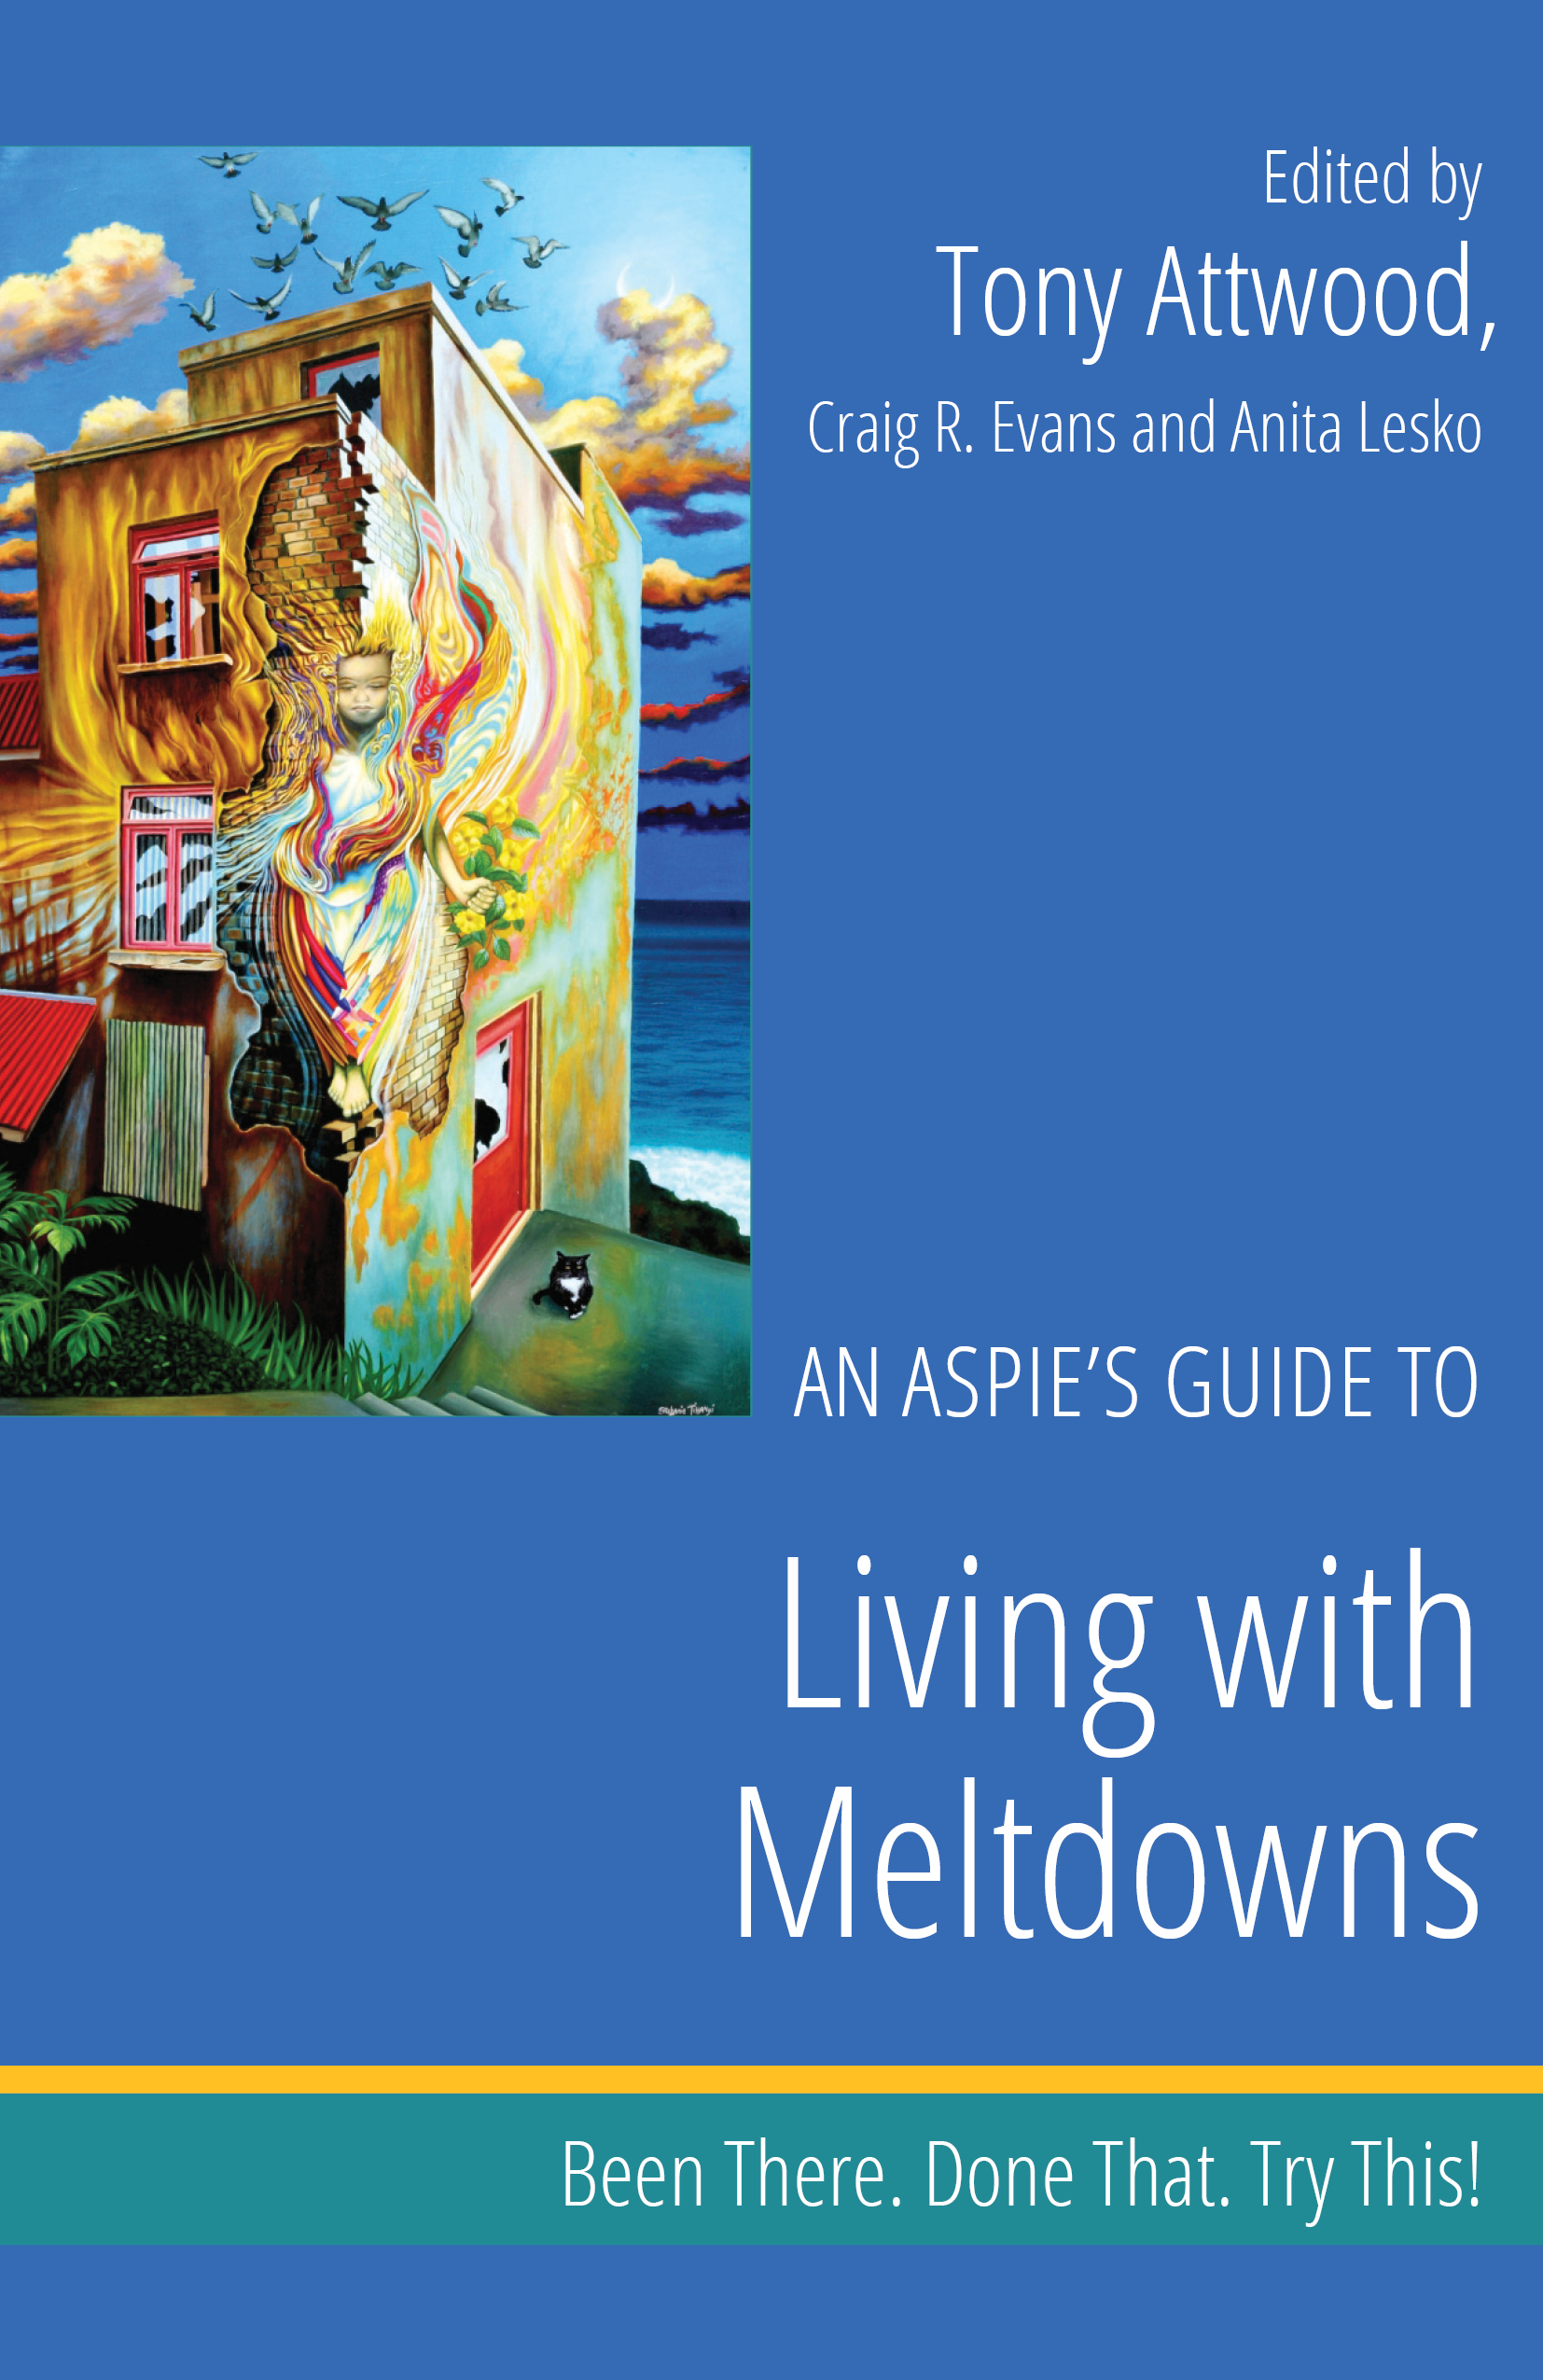 An Aspie's Guide to Living with Meltdowns